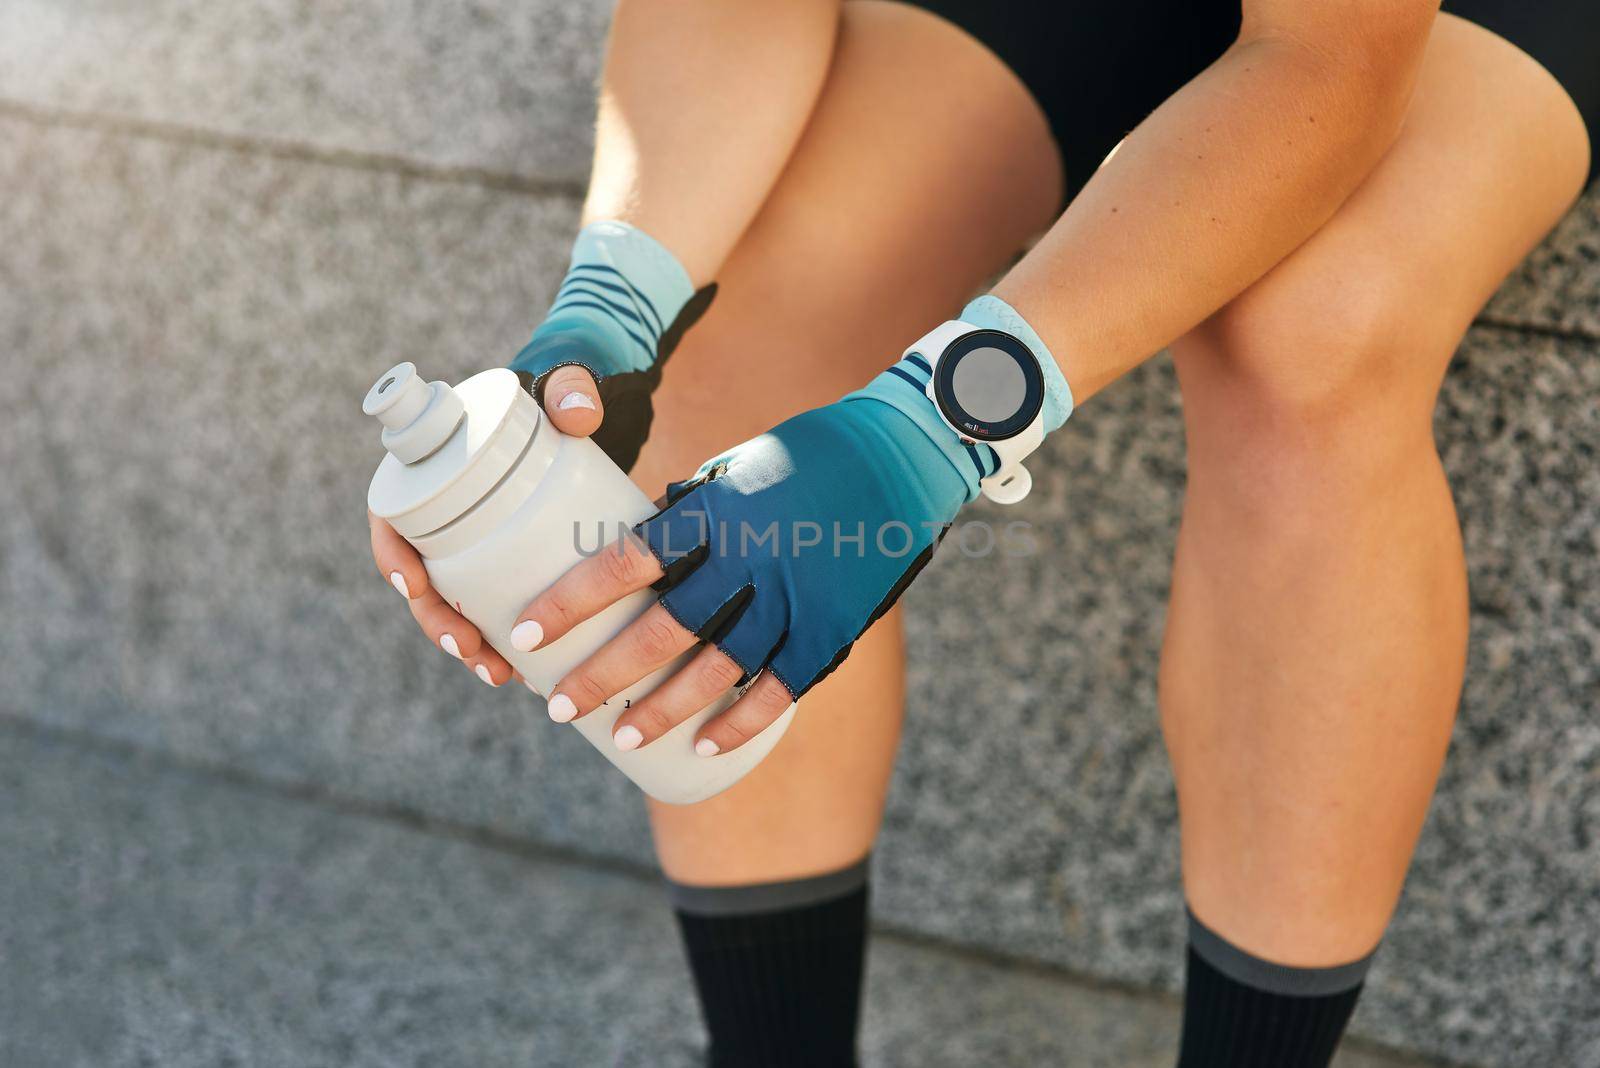 Close up shot of hands of professional female cyclist wearing protective cycling gloves and smartwatch holding drink bottle while sitting, resting after training by friendsstock